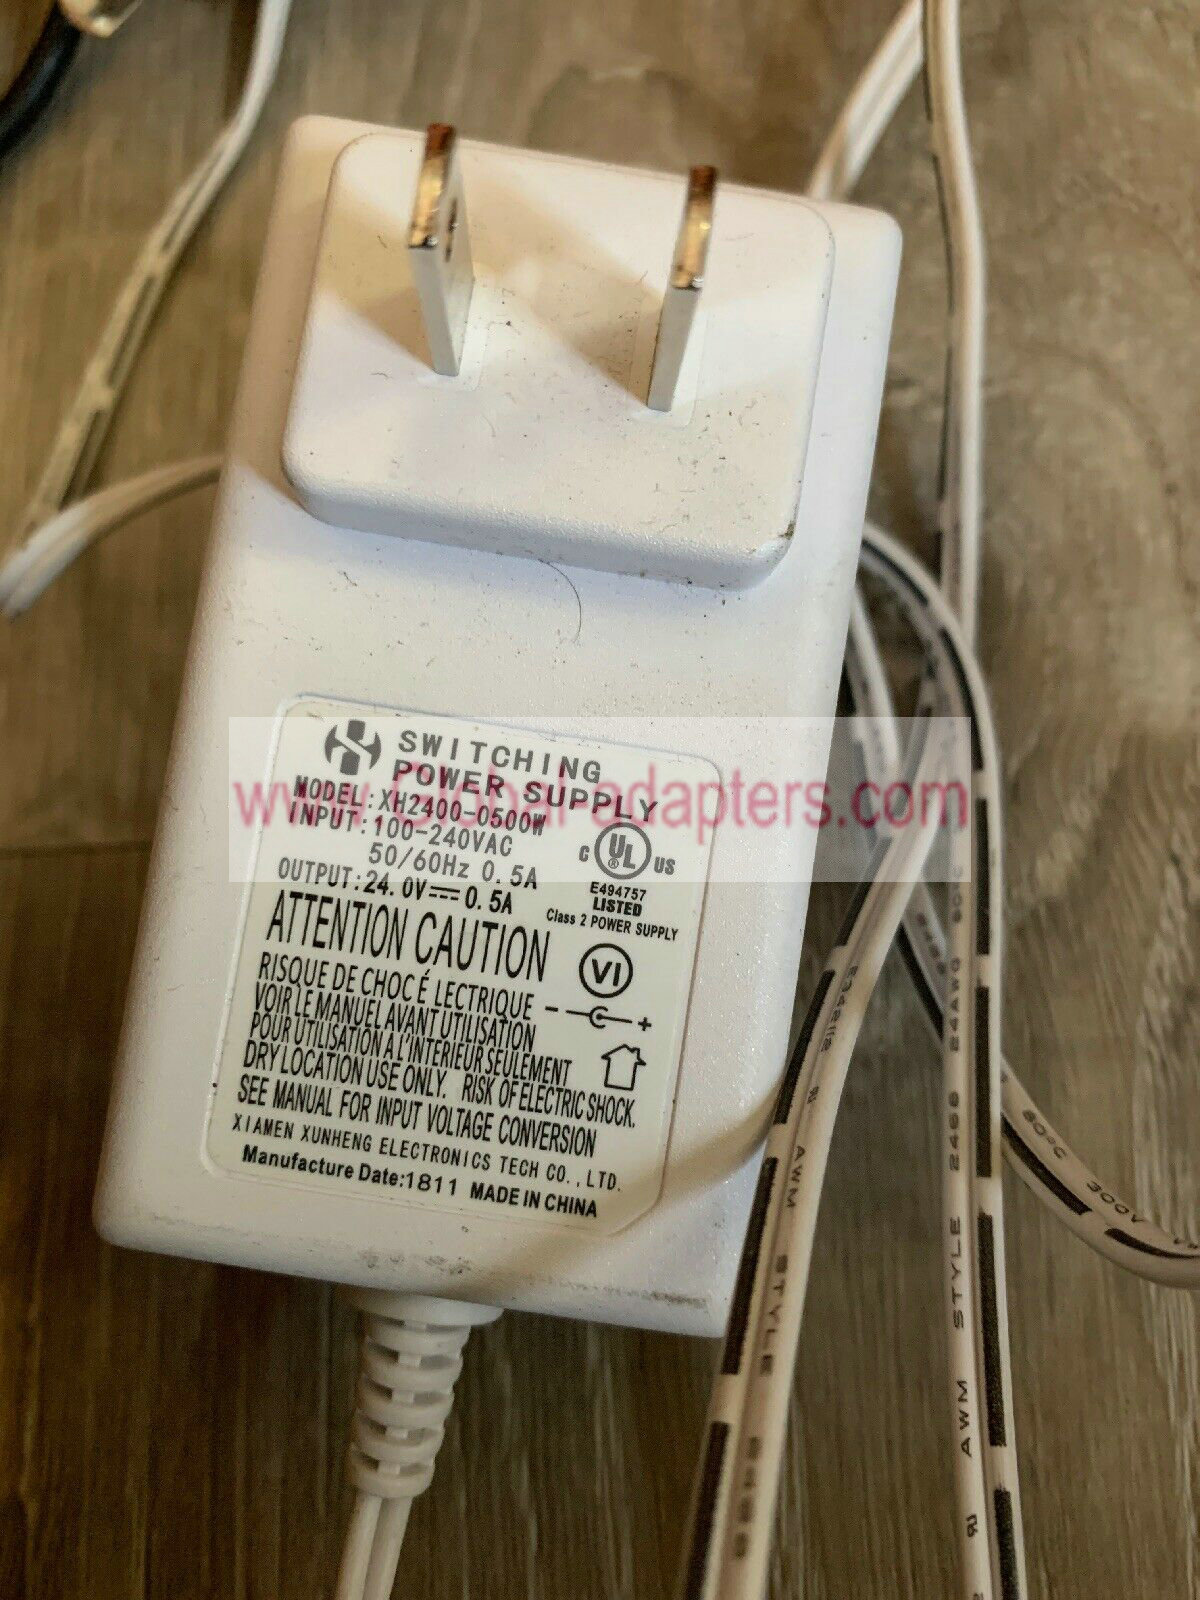 New Innov IVP2400-0500W 24 Volt 0.5A Class 2 AC Wall Power Supply Adapter - Click Image to Close